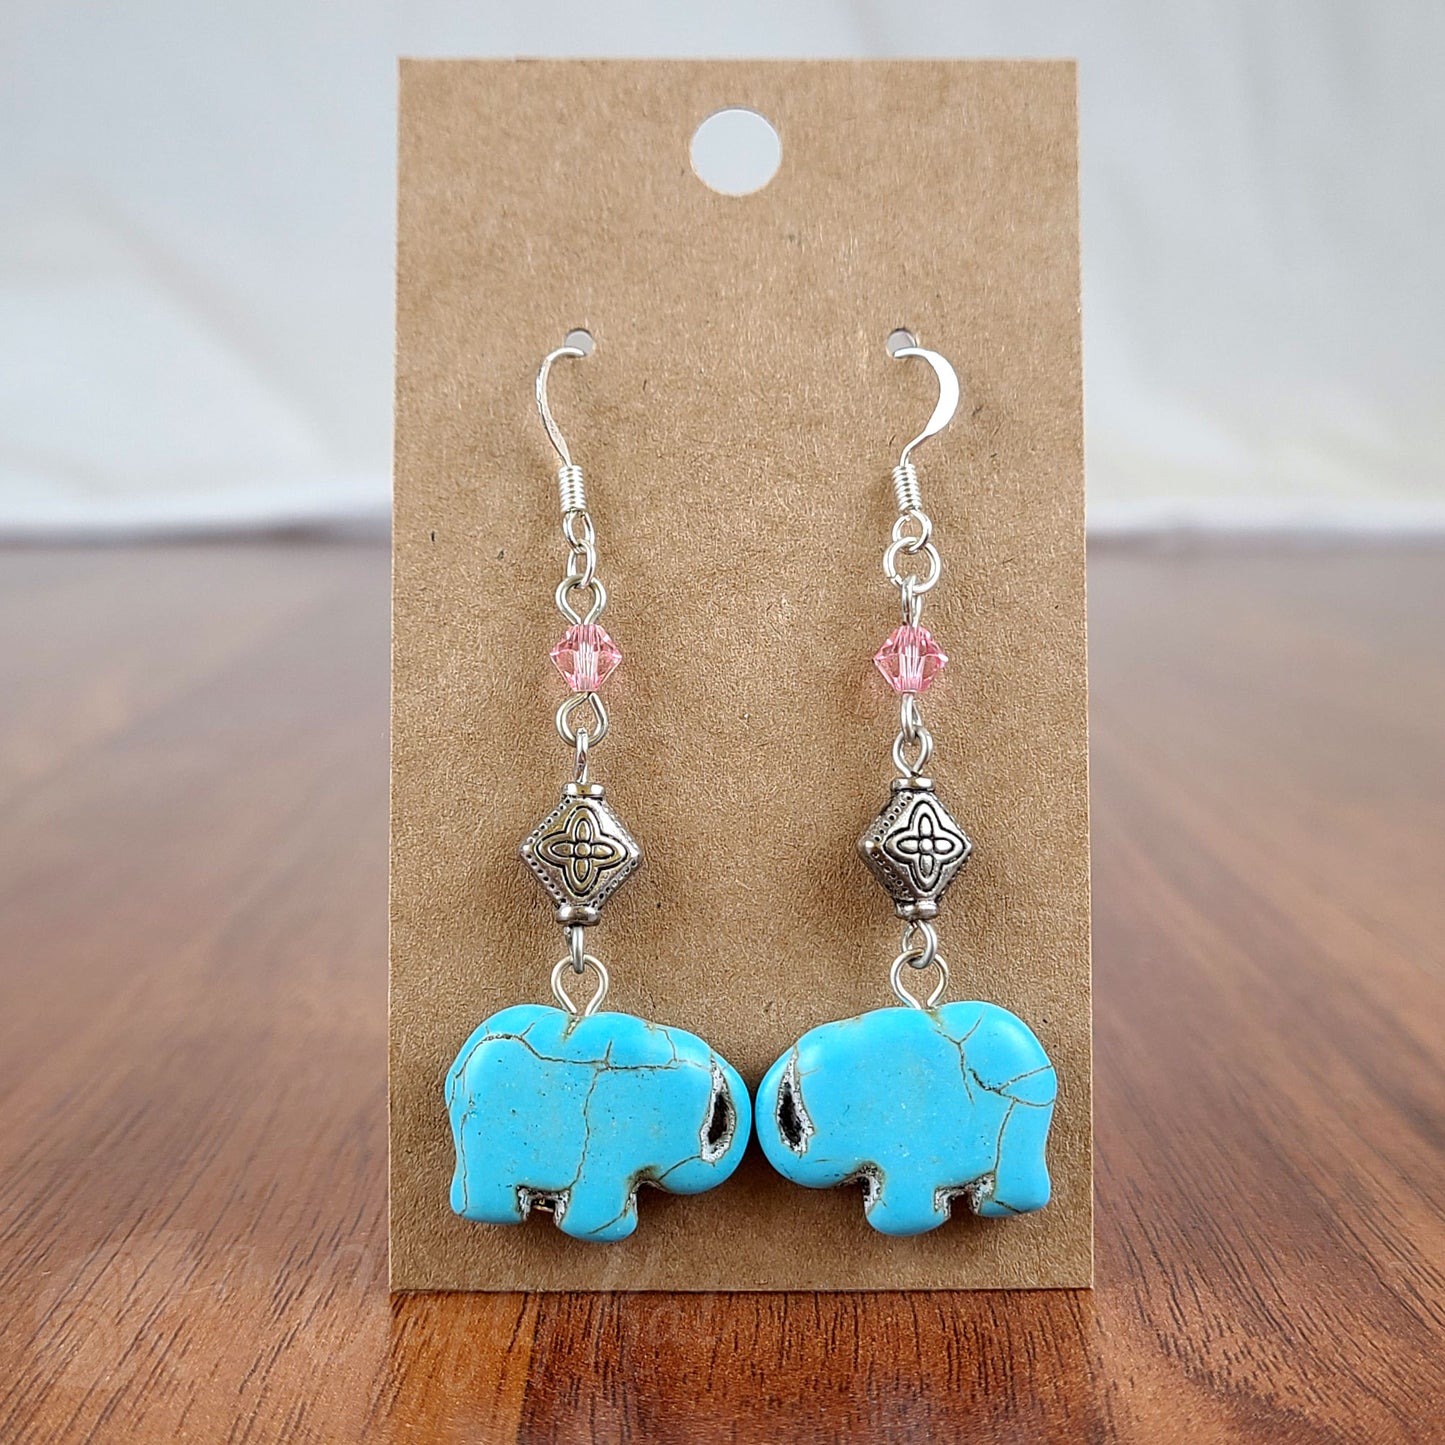 Tiered earrings featuring turquoise-dyed stone cut into the shapes of elephants, crystal bicone beads, and silver-plated metal beads and fittings